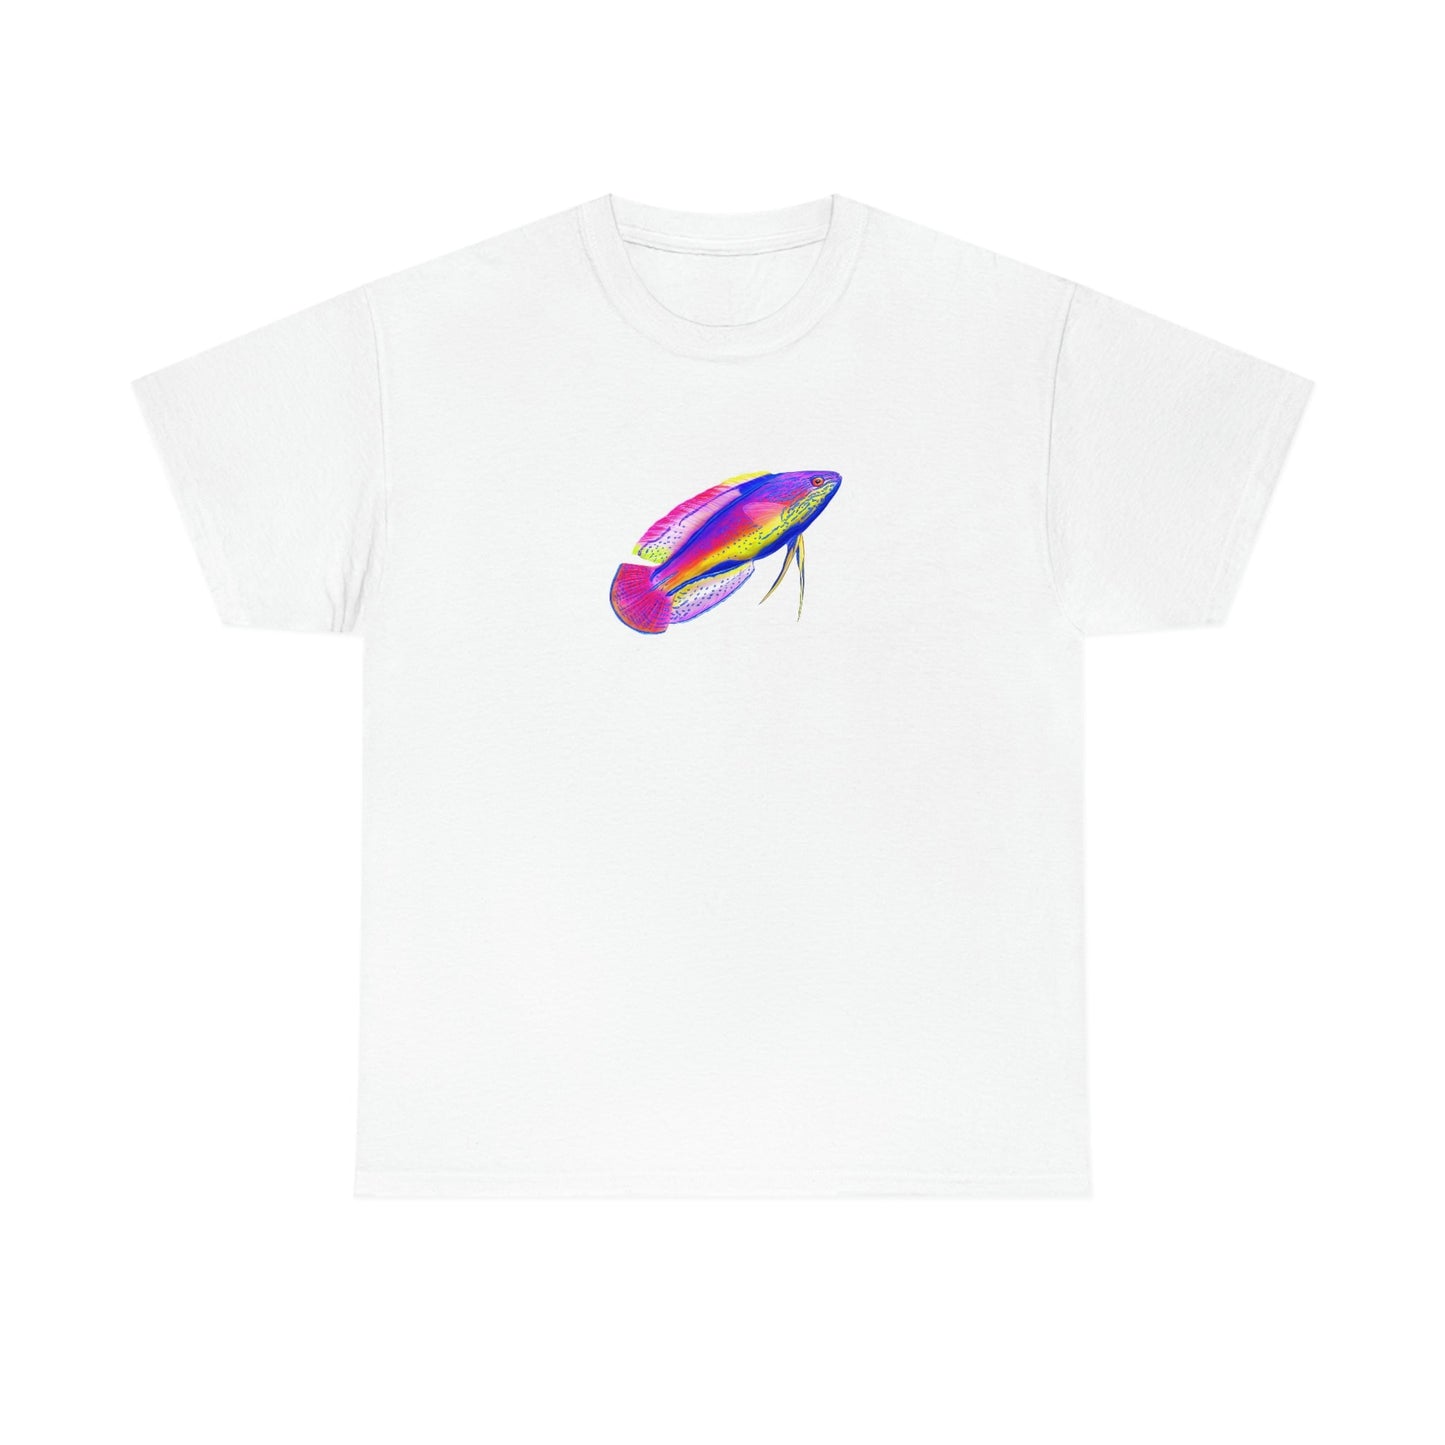 Simple Super Male Lineatus Wrasse Tang Shirt - Reef of Clowns